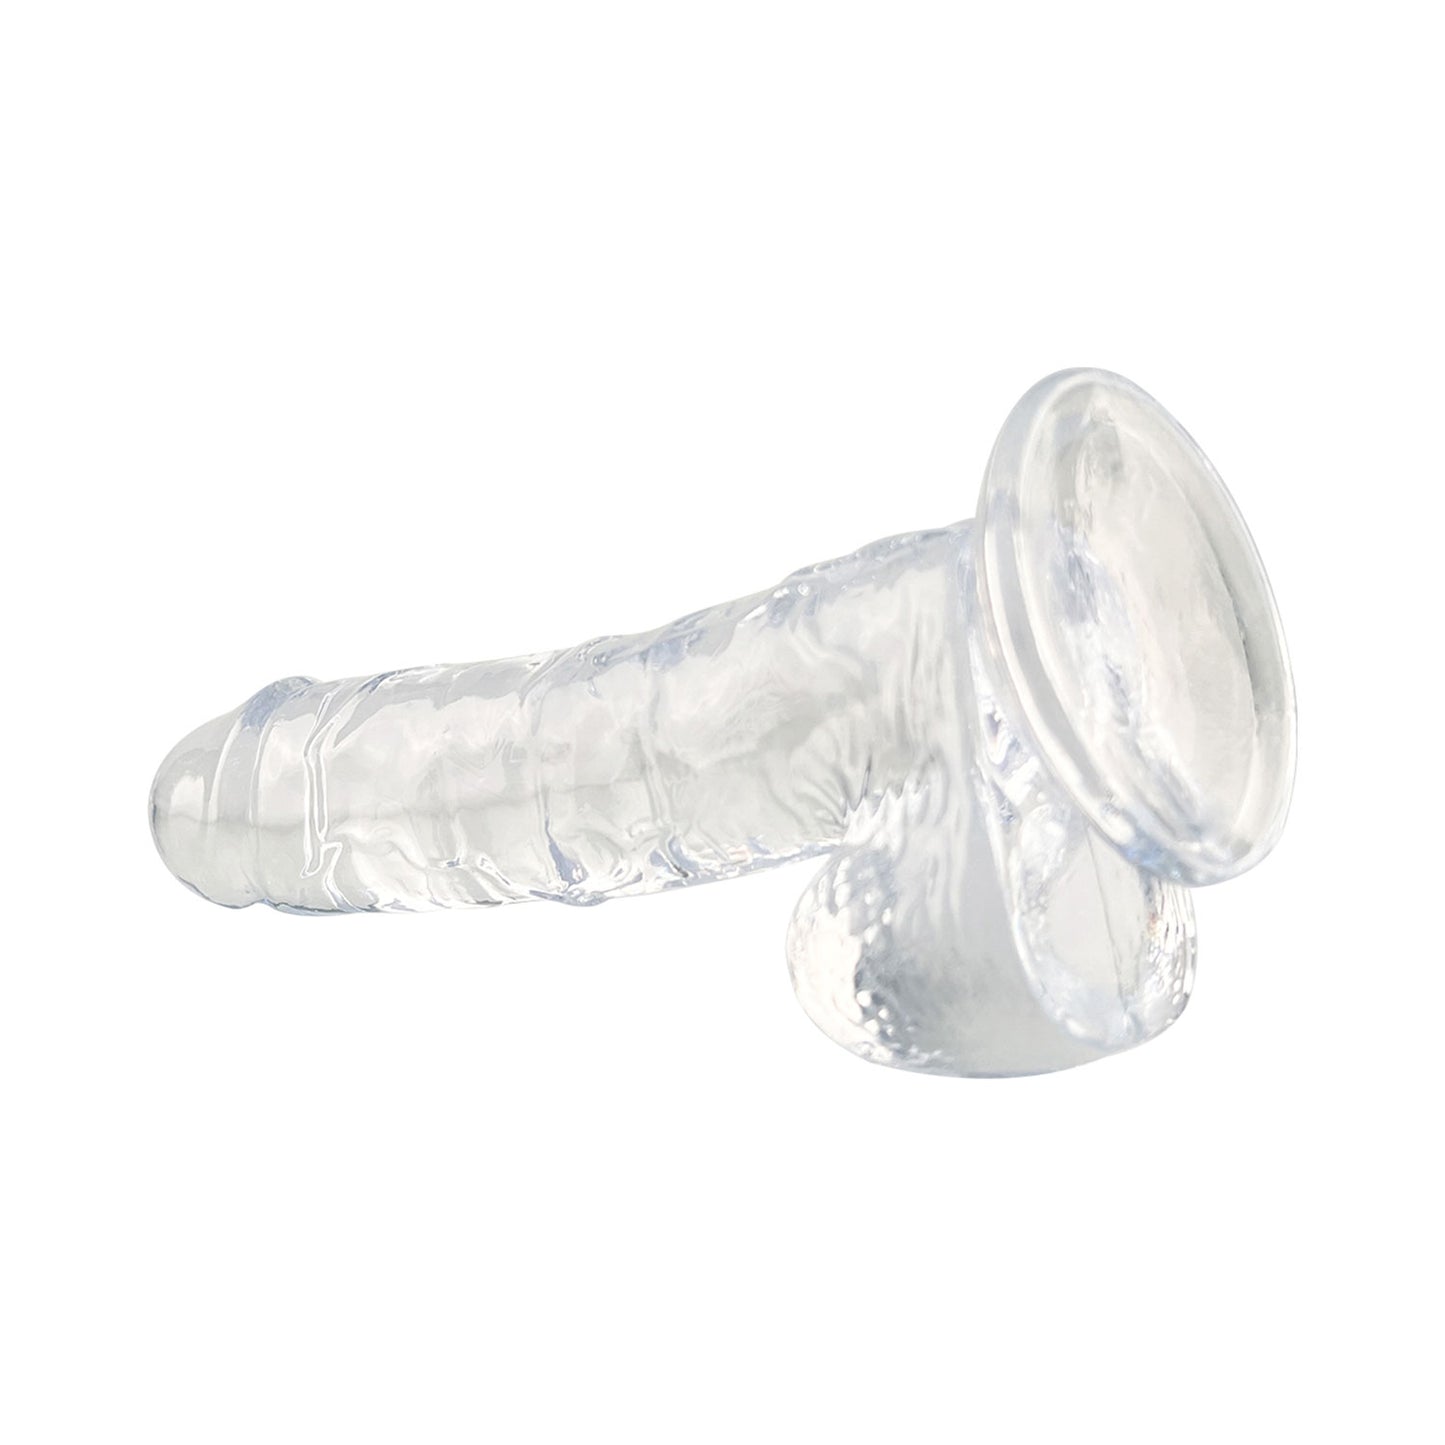 The Horny Company - No Frills Dildo 22cm x 4.5cm Suction Cup Dong with Balls Clear